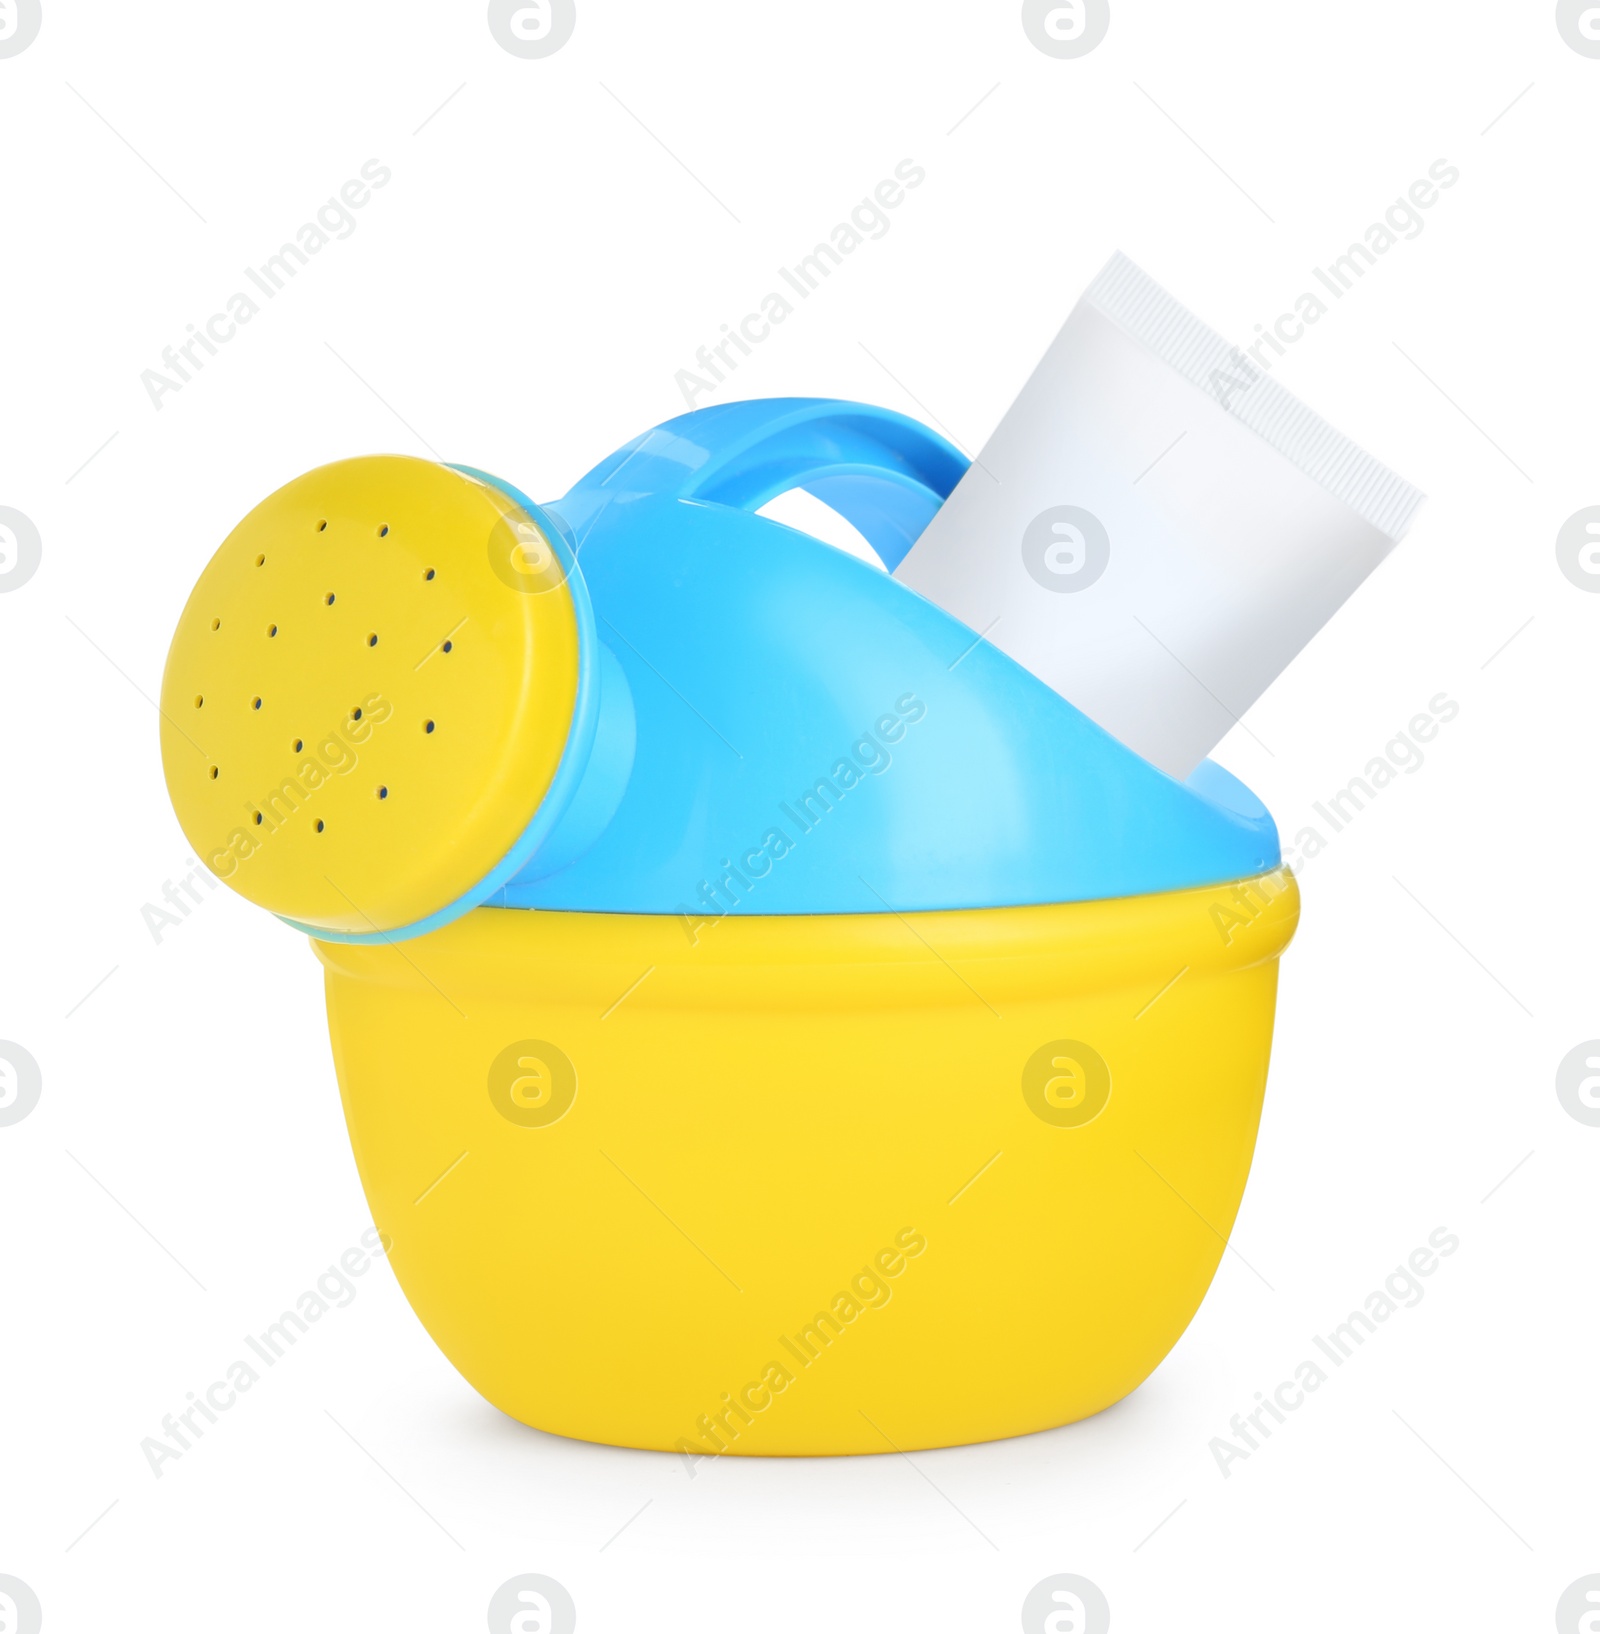 Photo of Suntan product and plastic beach toy on white background